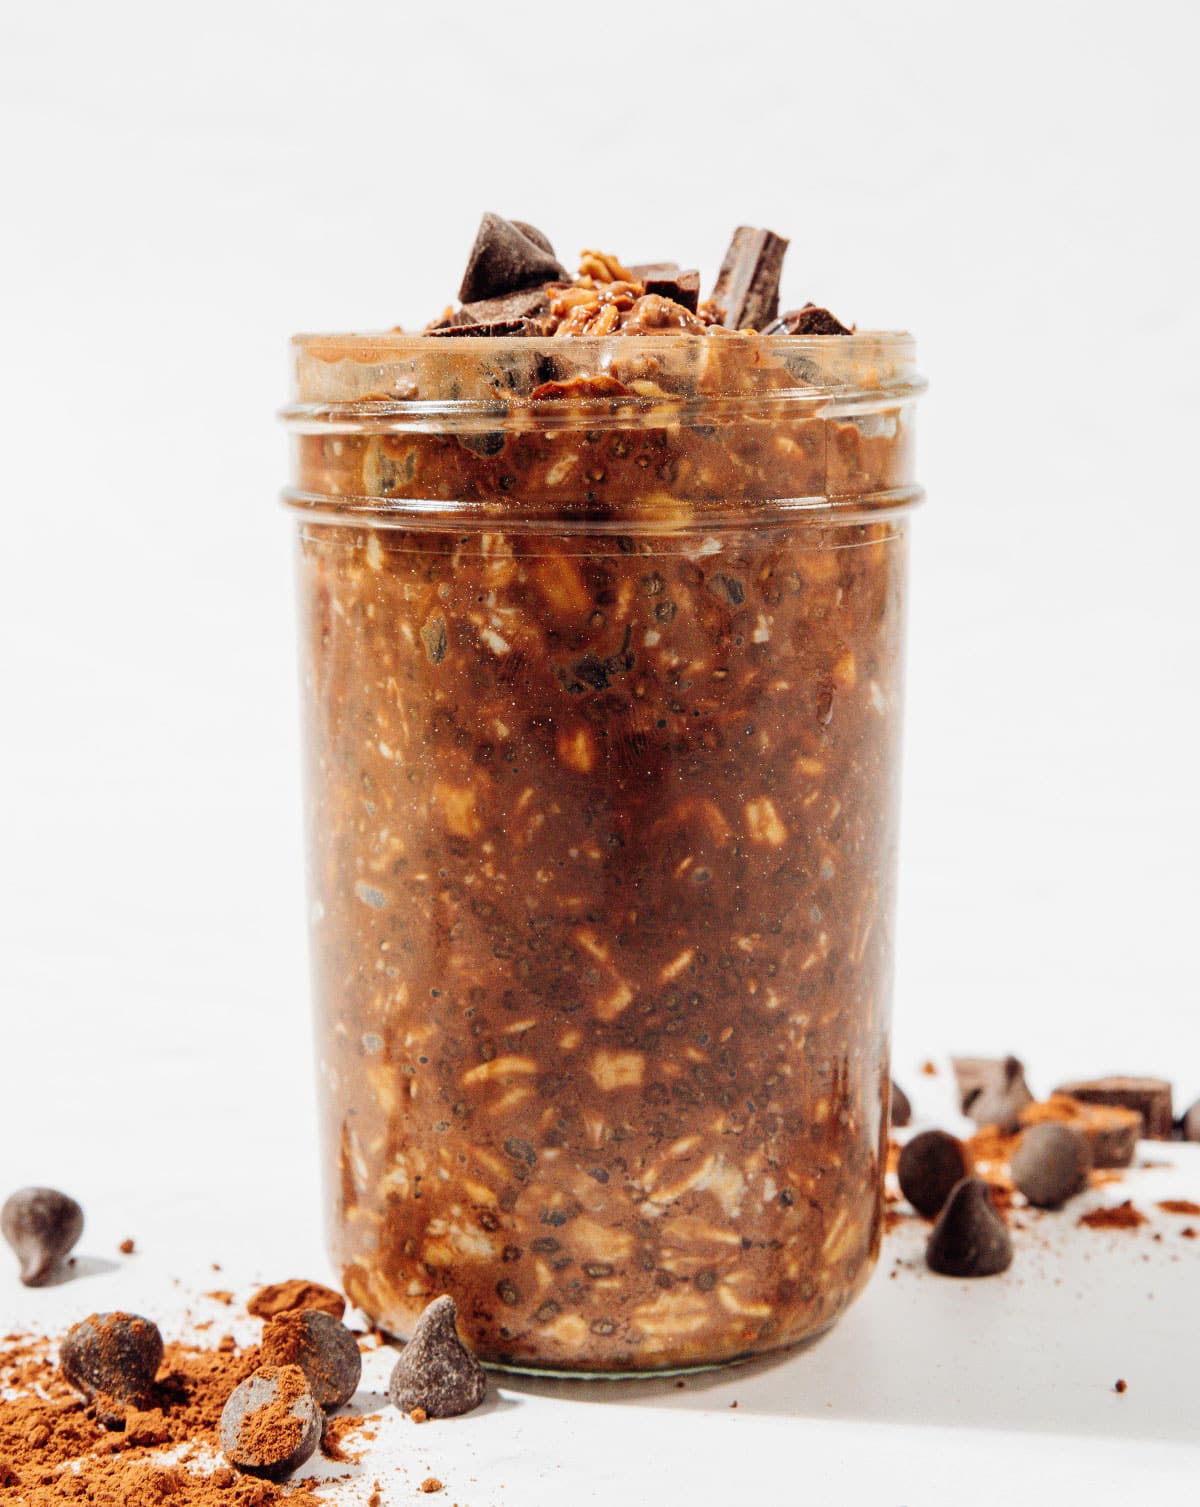 Chocolate overnight oats in a jar.